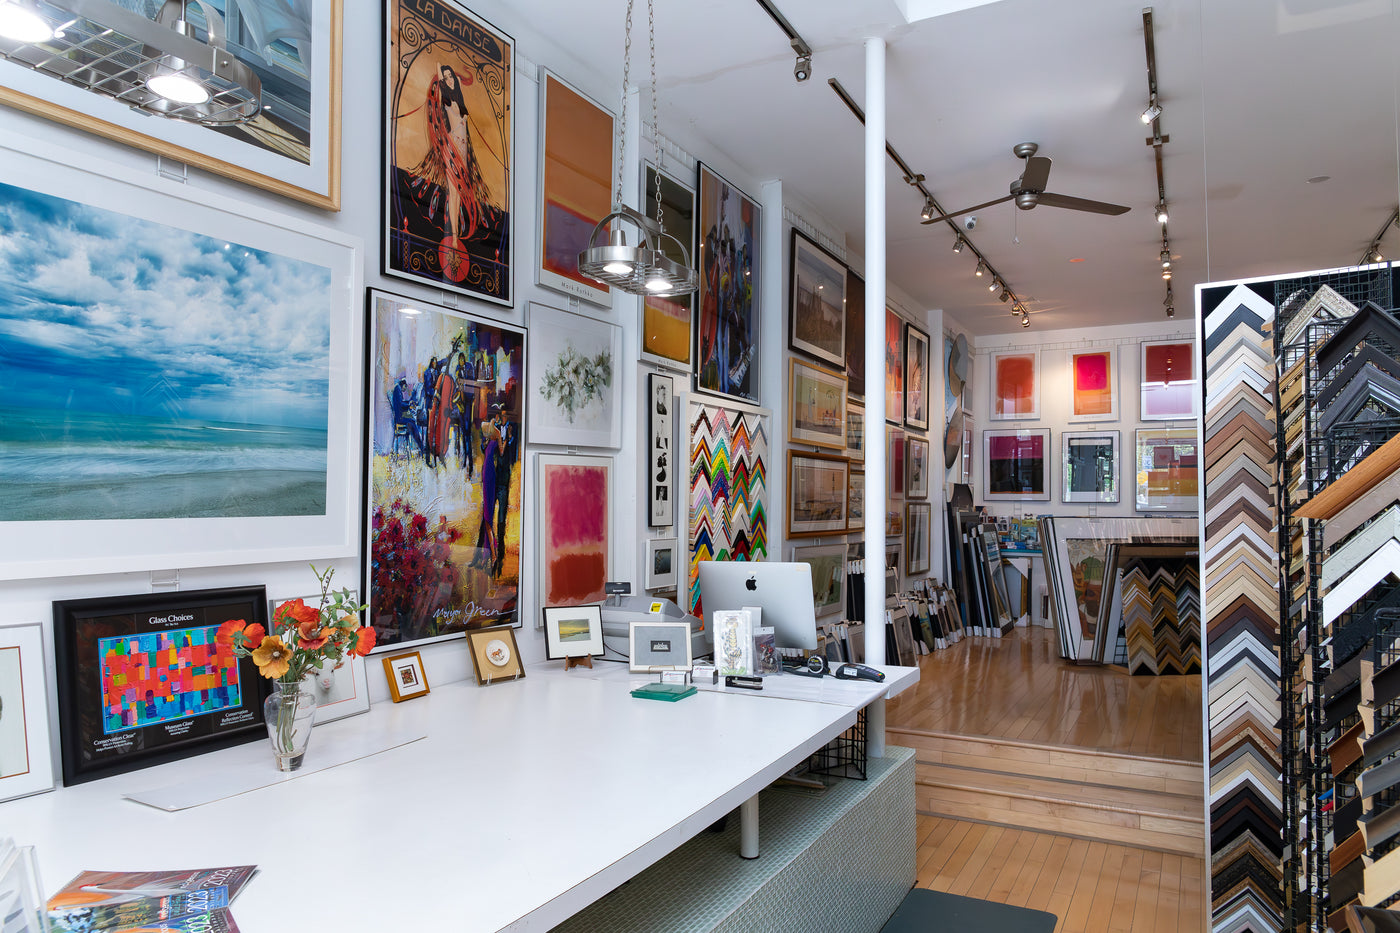 Image of the store with lots of artworks hung to the walls of the interiors.